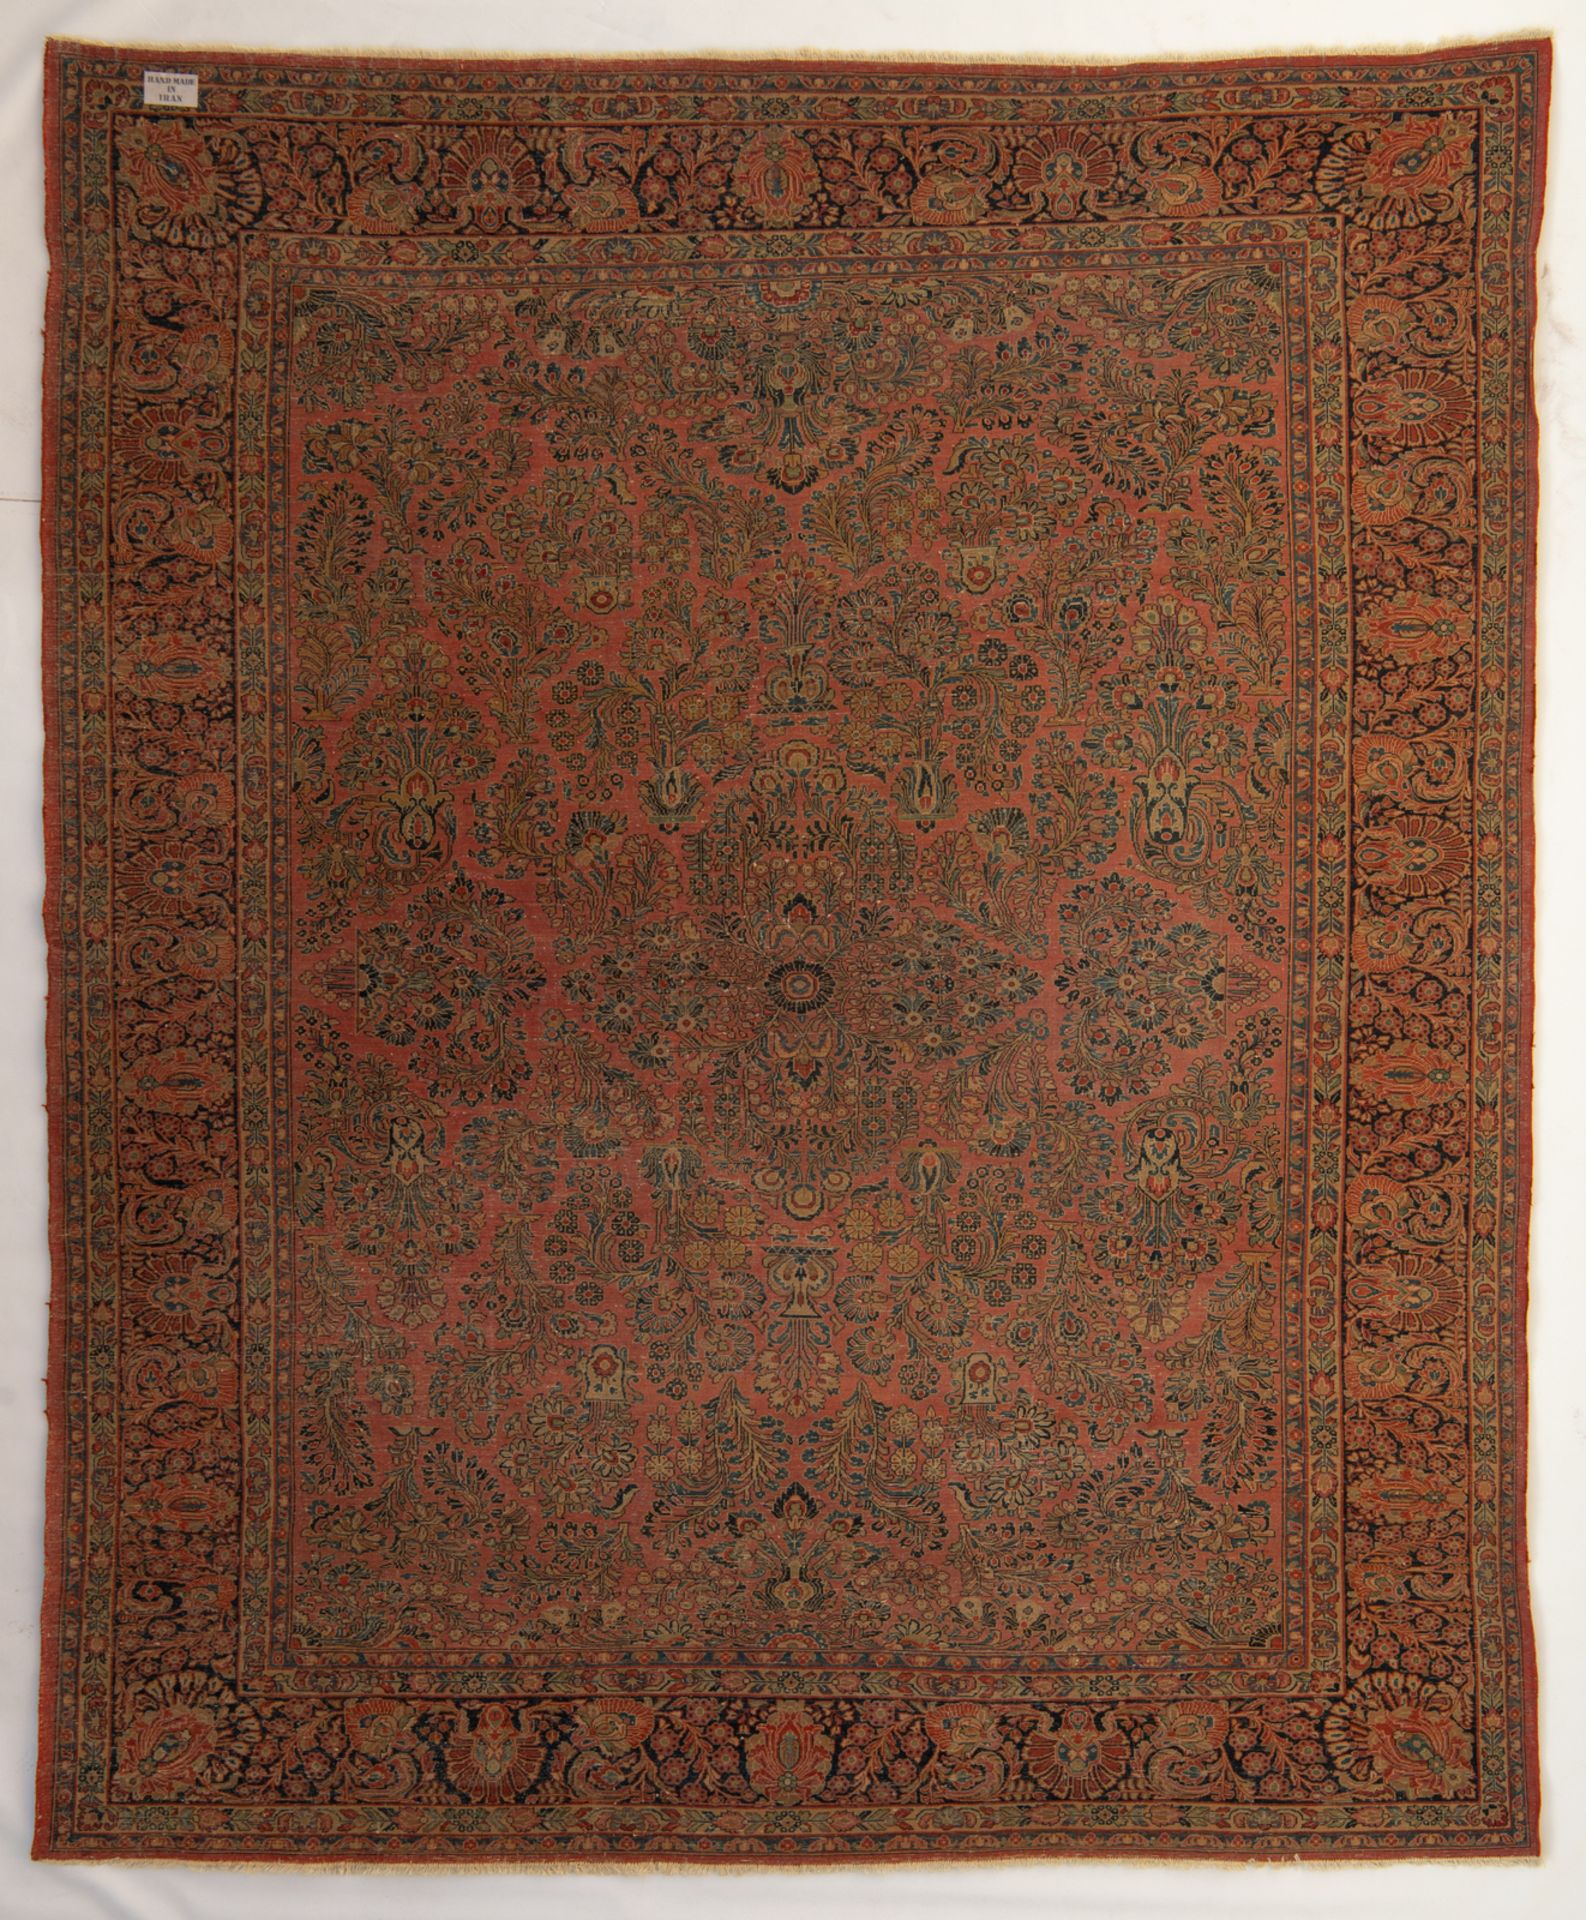 An Oriental rug, decorated with floral motifs, wool on cotton, Sarough, 271 x 345 cm - Image 2 of 4